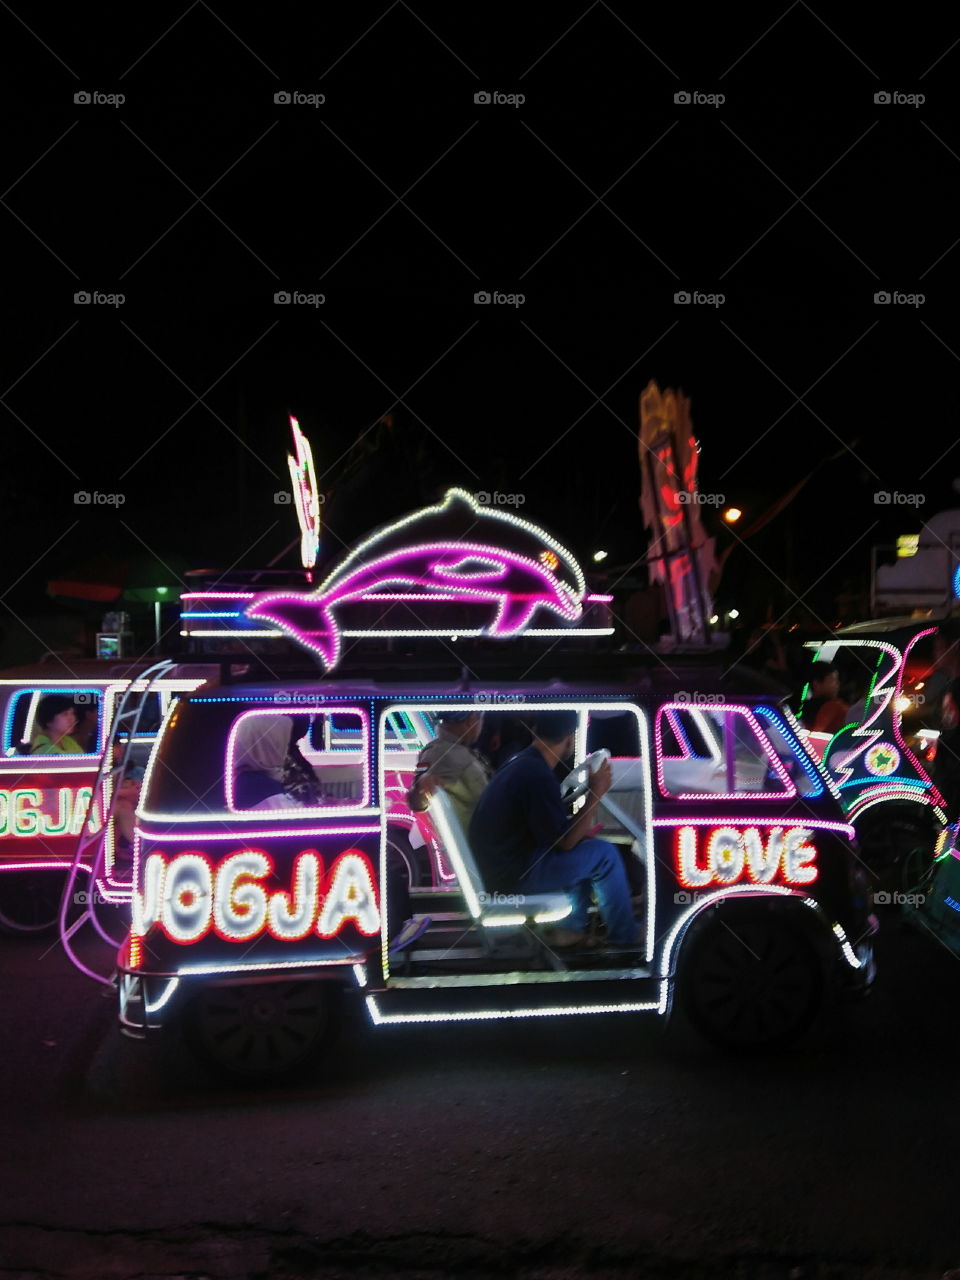 Vehicle, Car, Transportation System, Neon, Competition